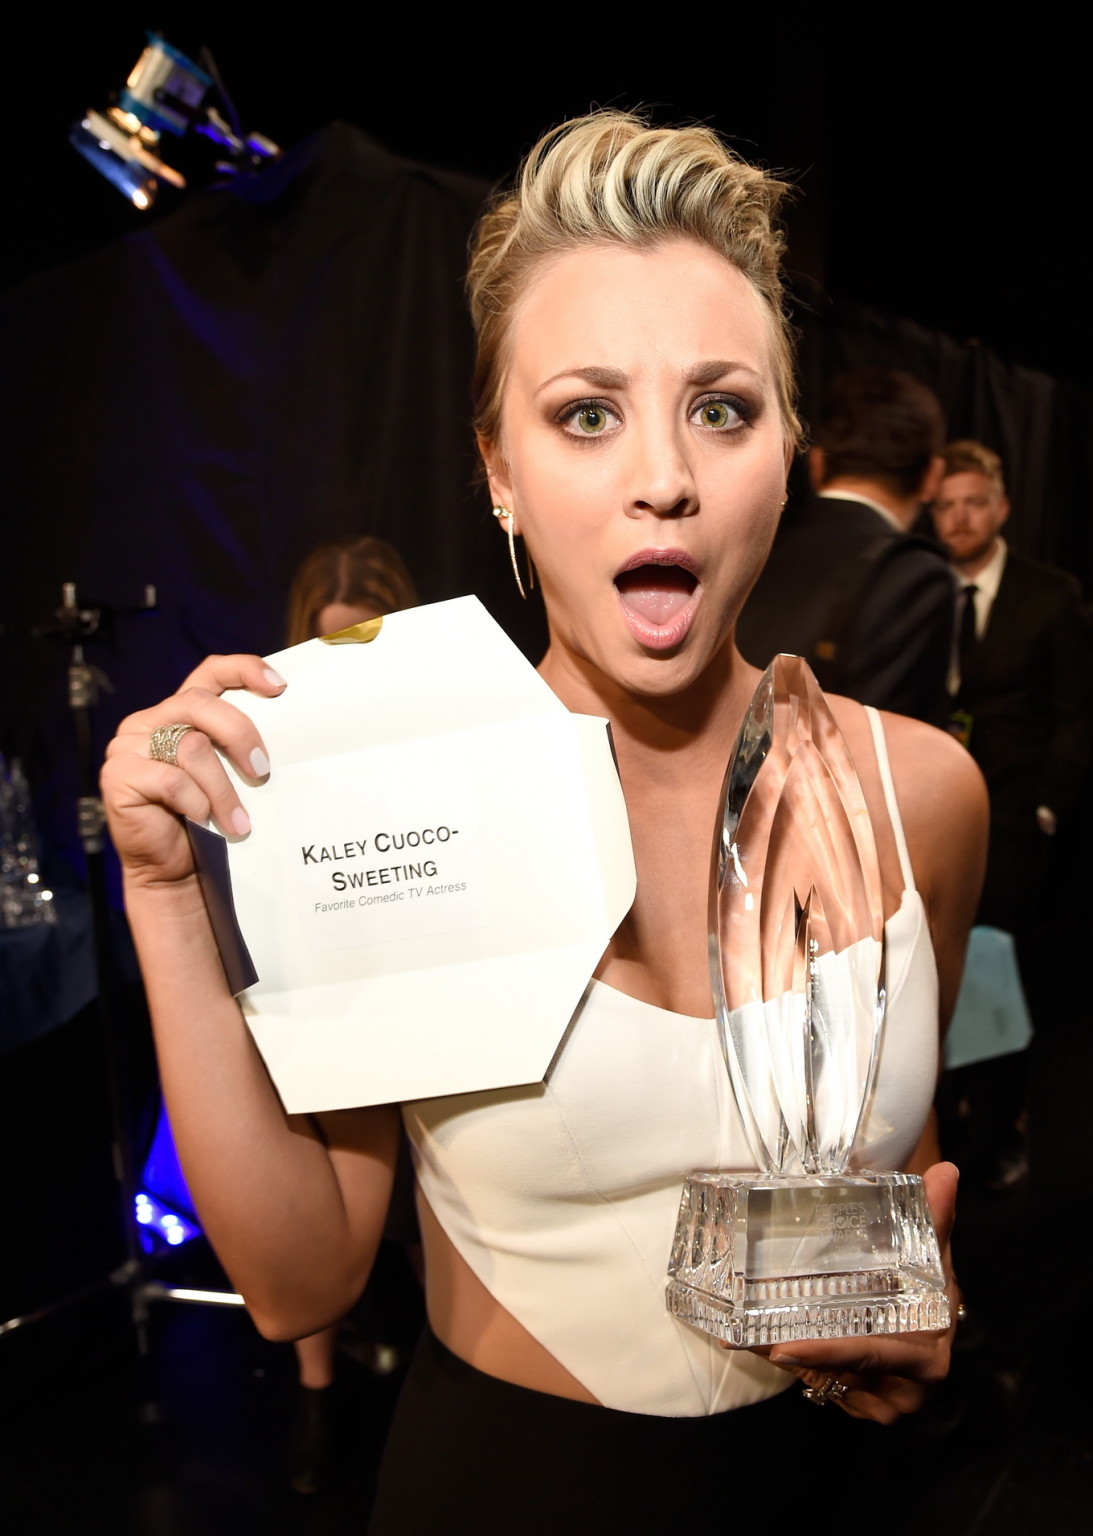 Kaley Cuoco busty in tiny white top at the 41st Annual Peoples Choice Awards in  #75176337